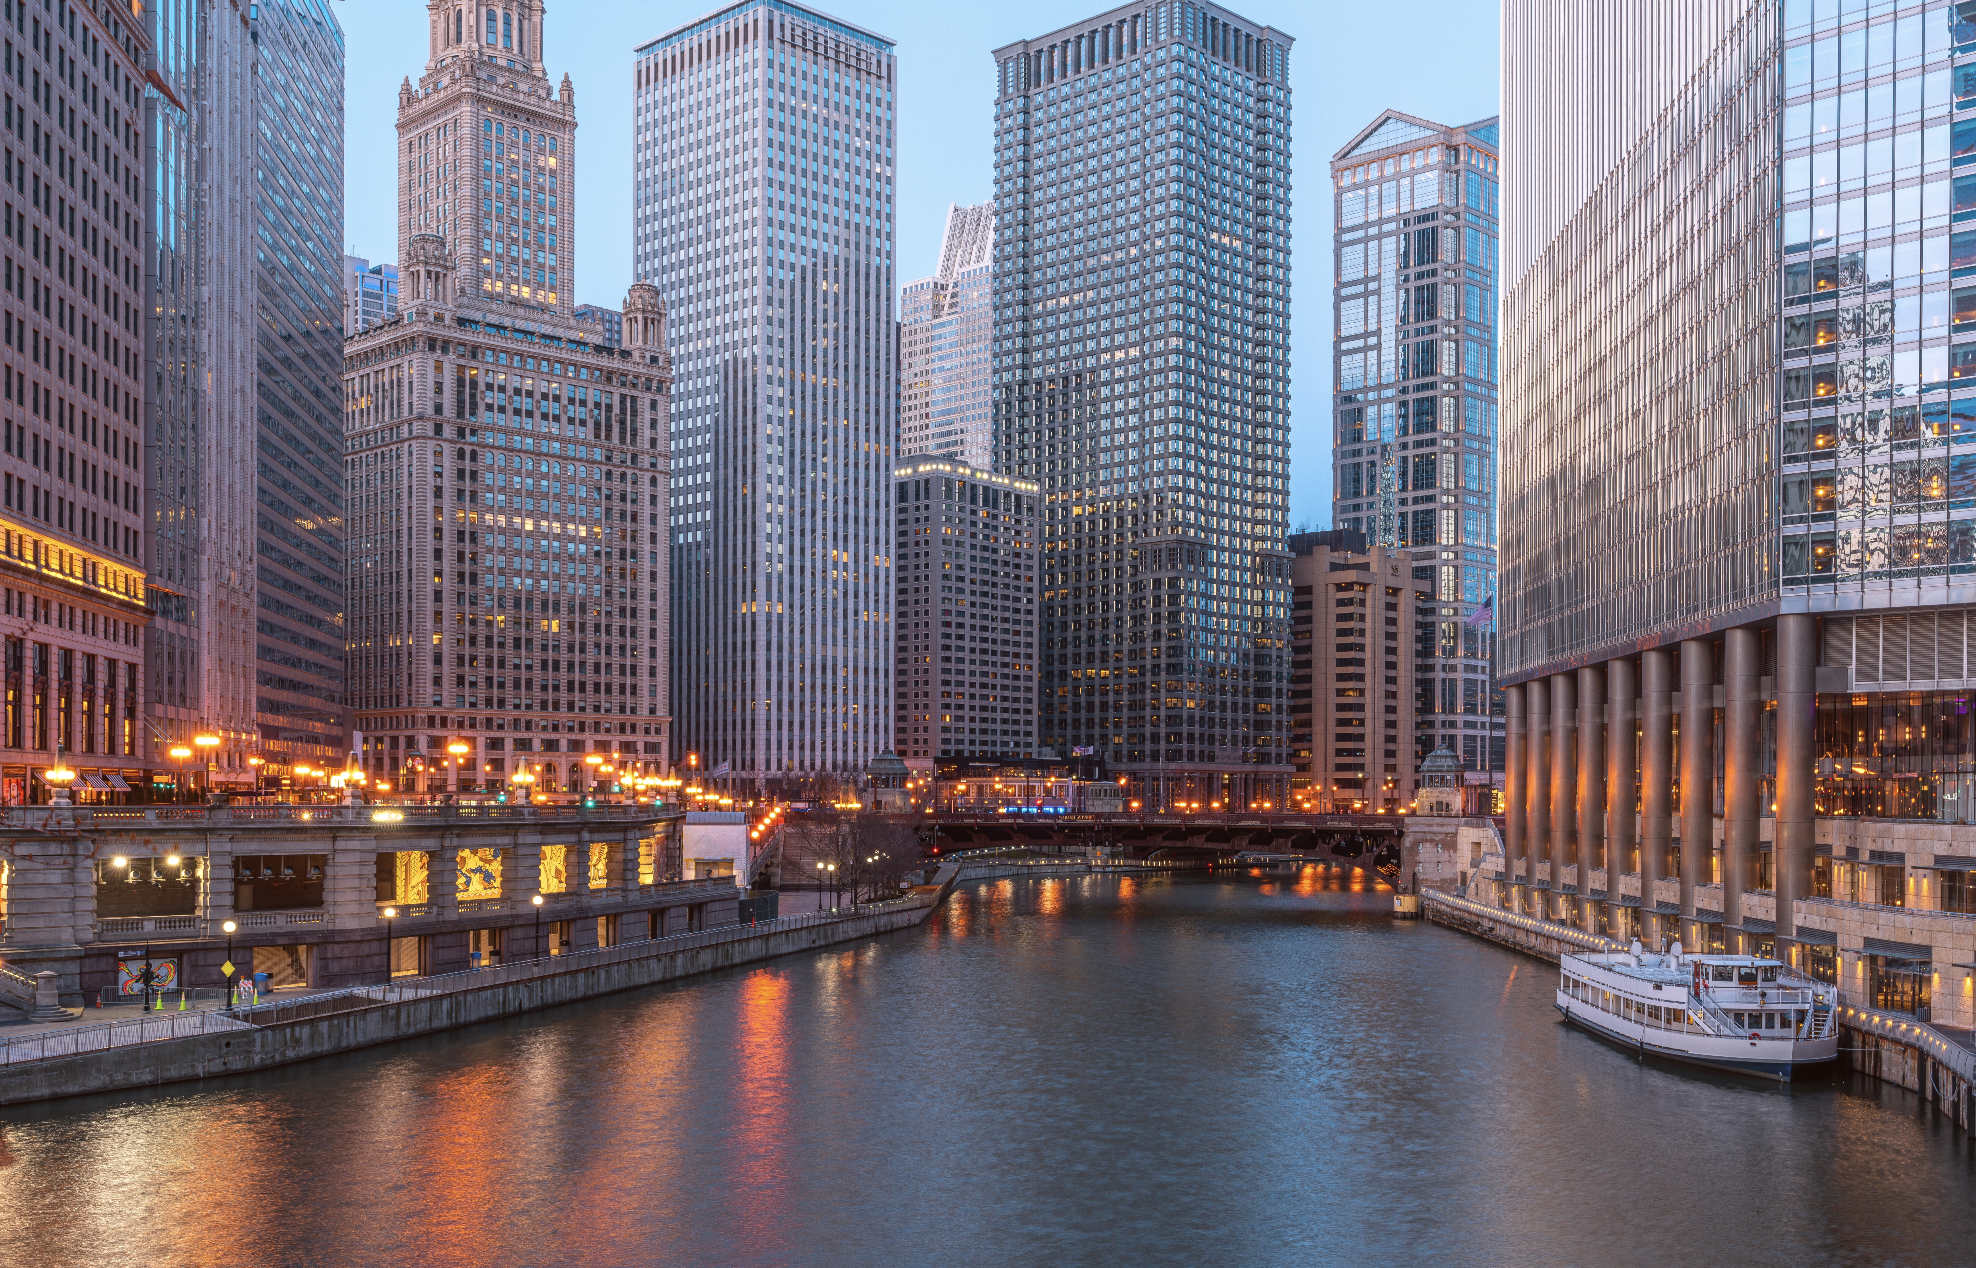 You’ll be able to swim in the Chicago River this September